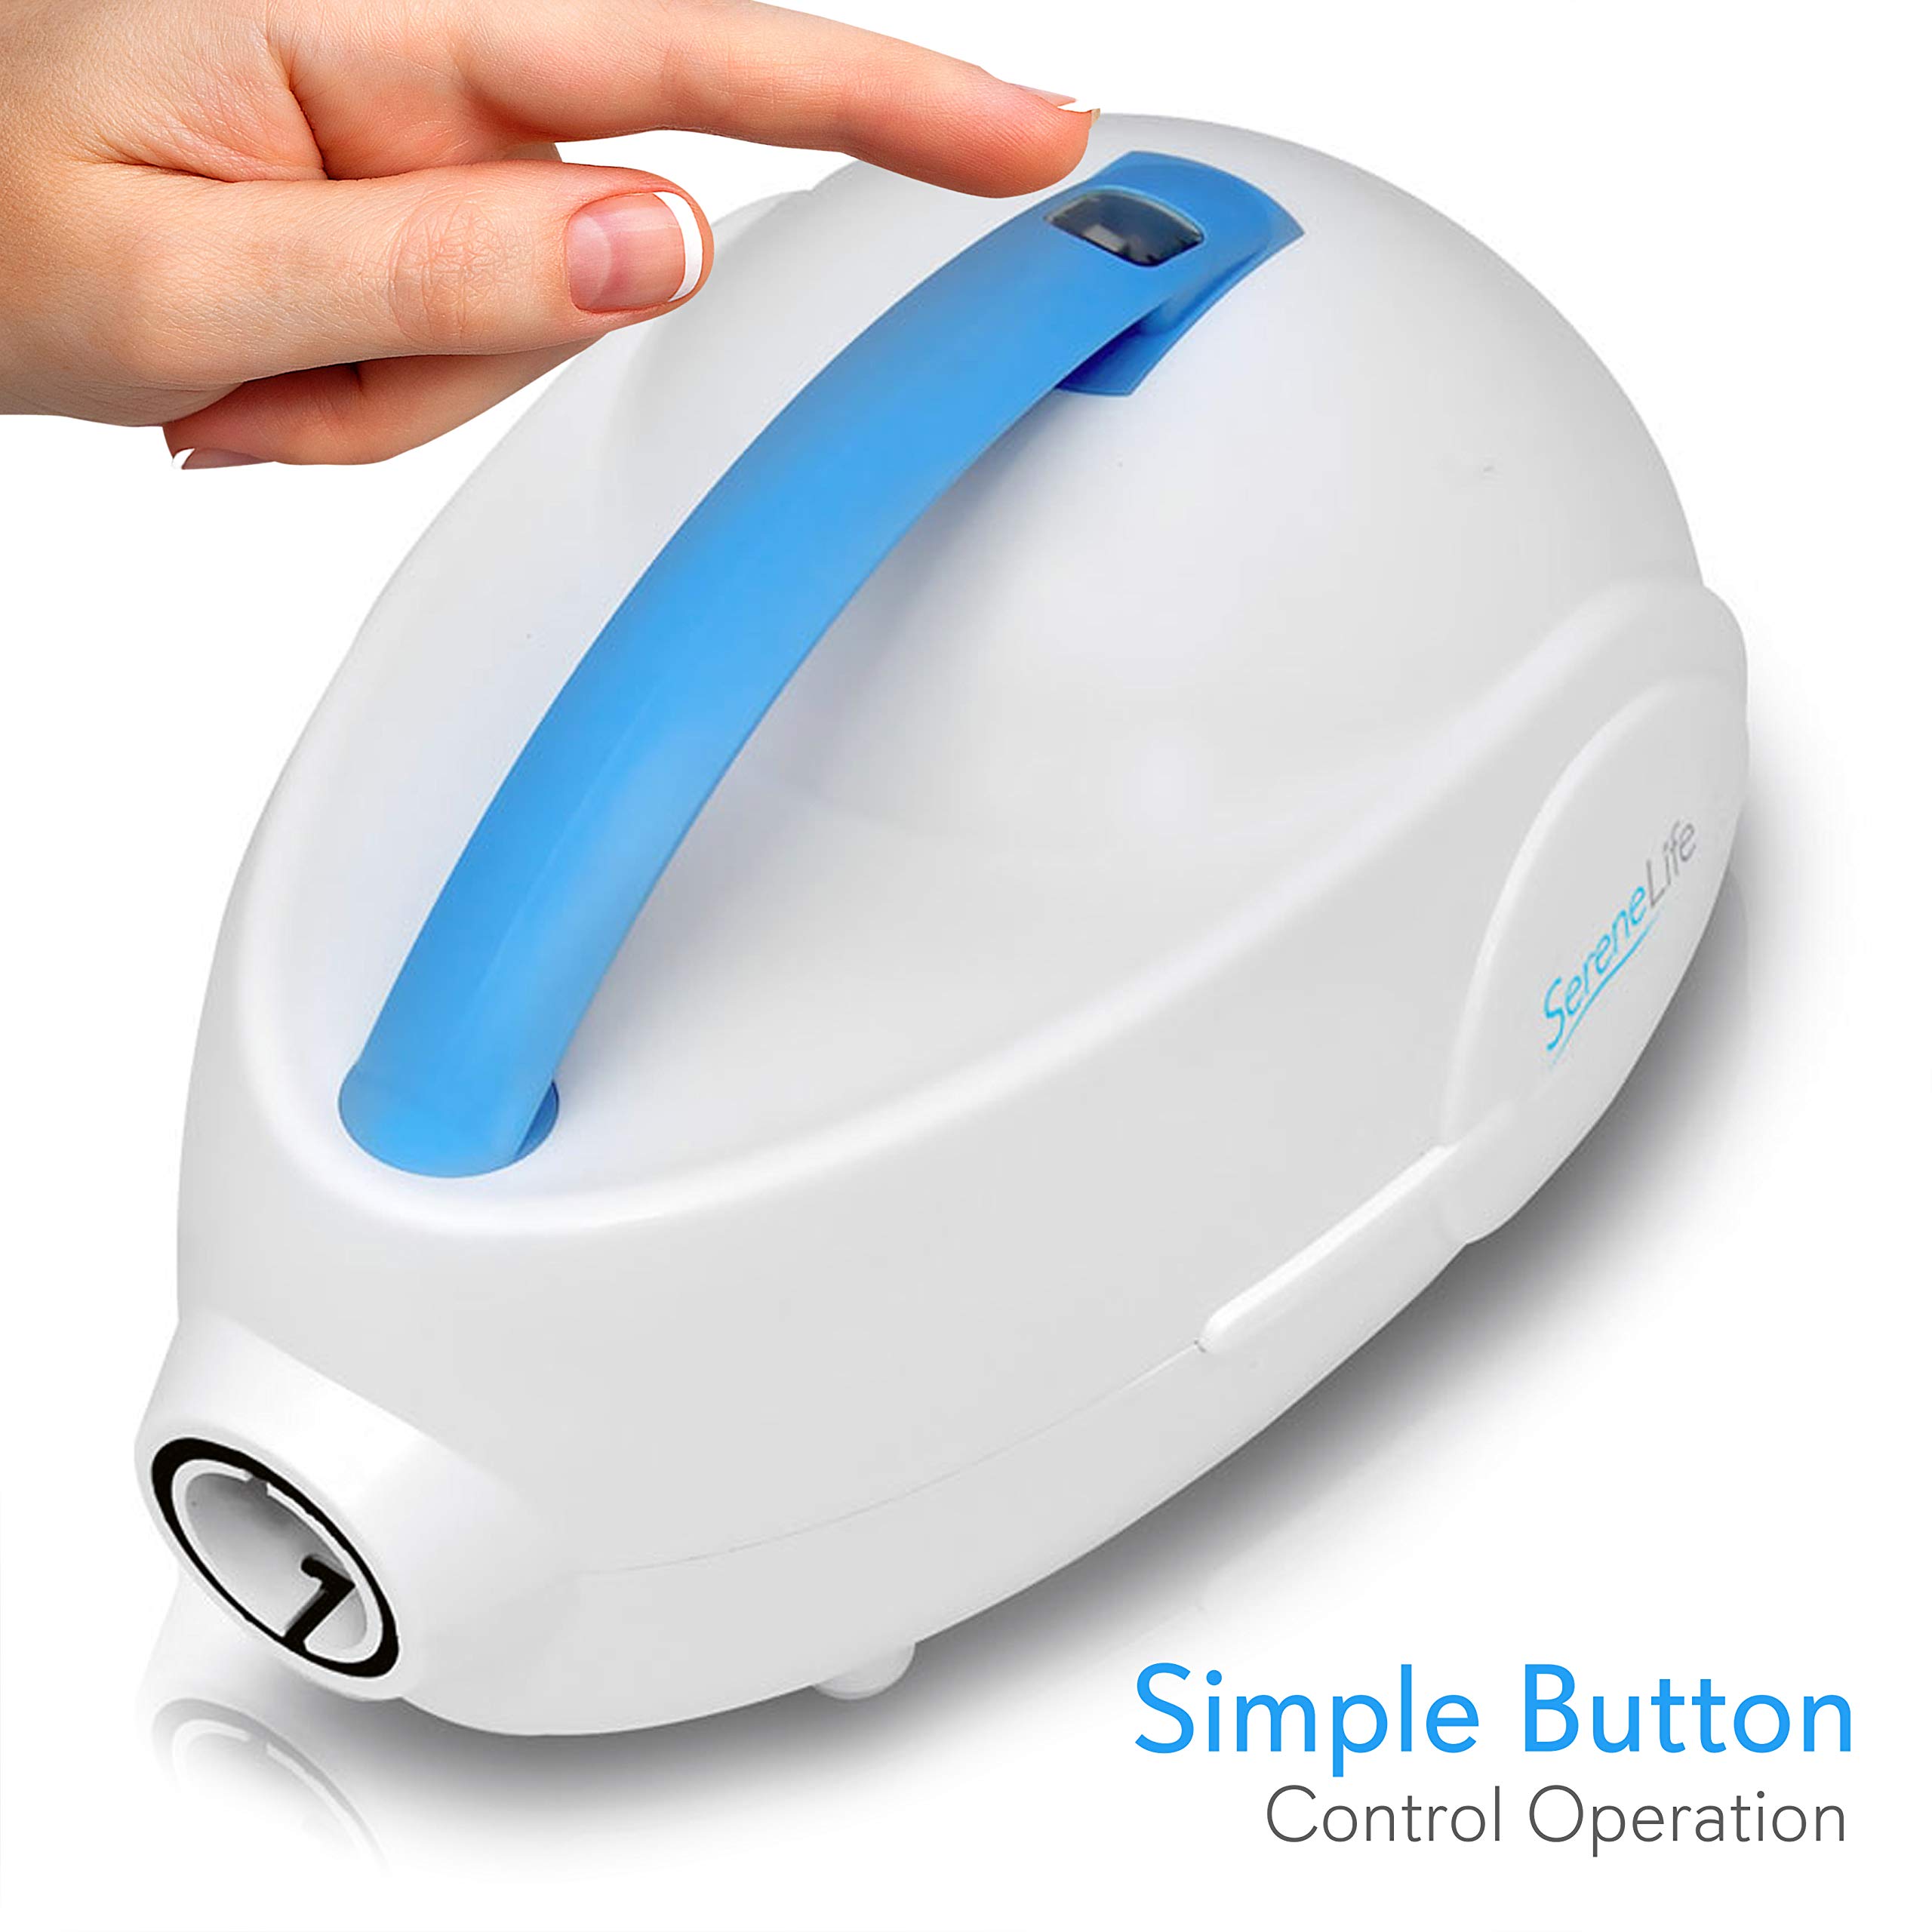 Portable Spa Bubble Bath Massager - Thermal Spa Waterproof Non-Slip Mat with Suction Cup Bottom, Motorized Air Pump & Adjustable Bubble Settings - Remote Control Included - Serenelife AZPHSPAMT24HT